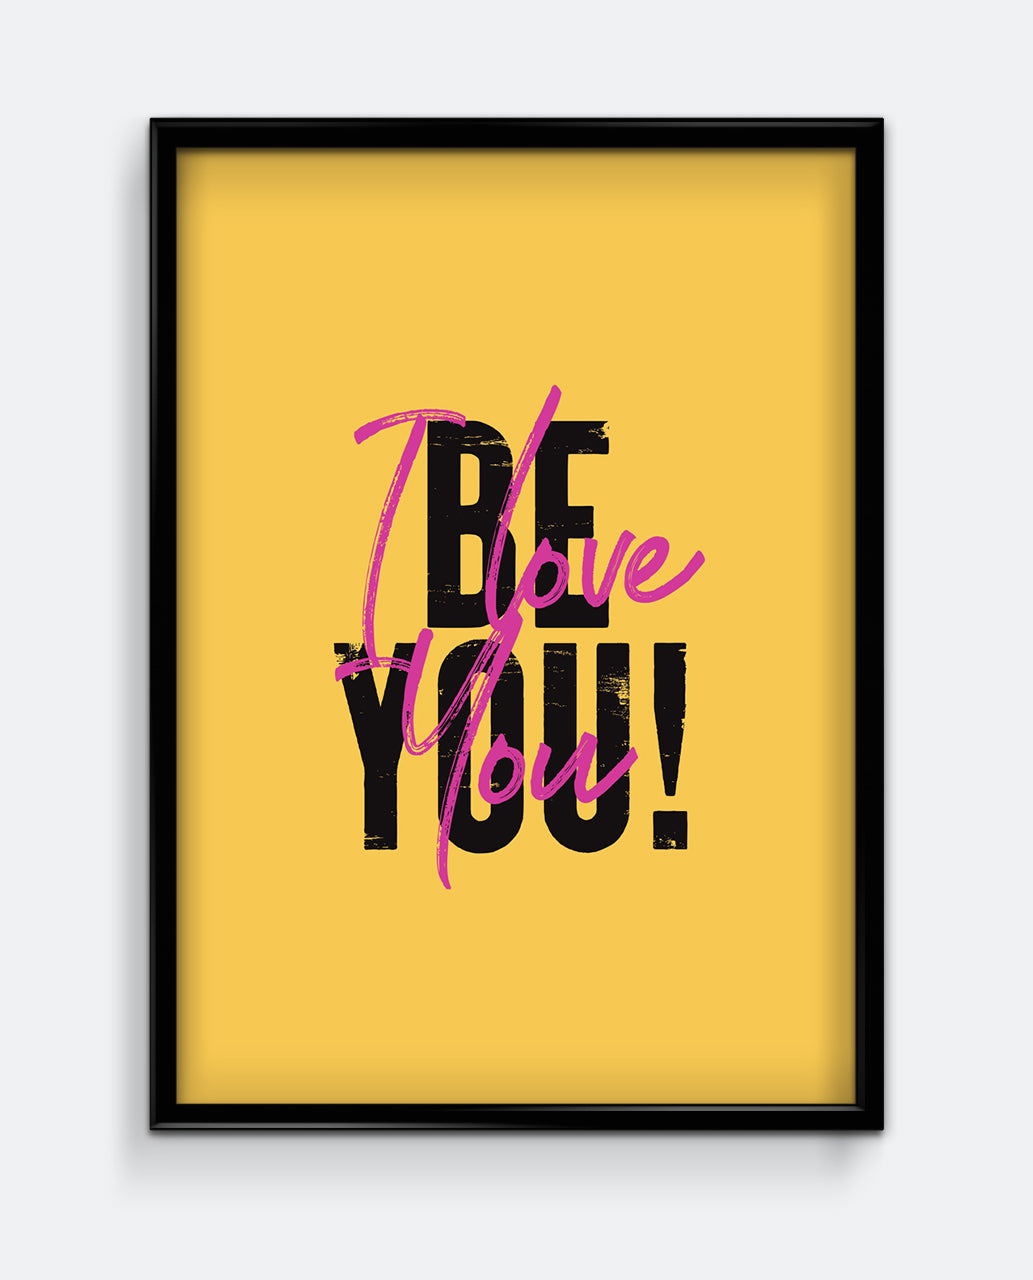 Be You!